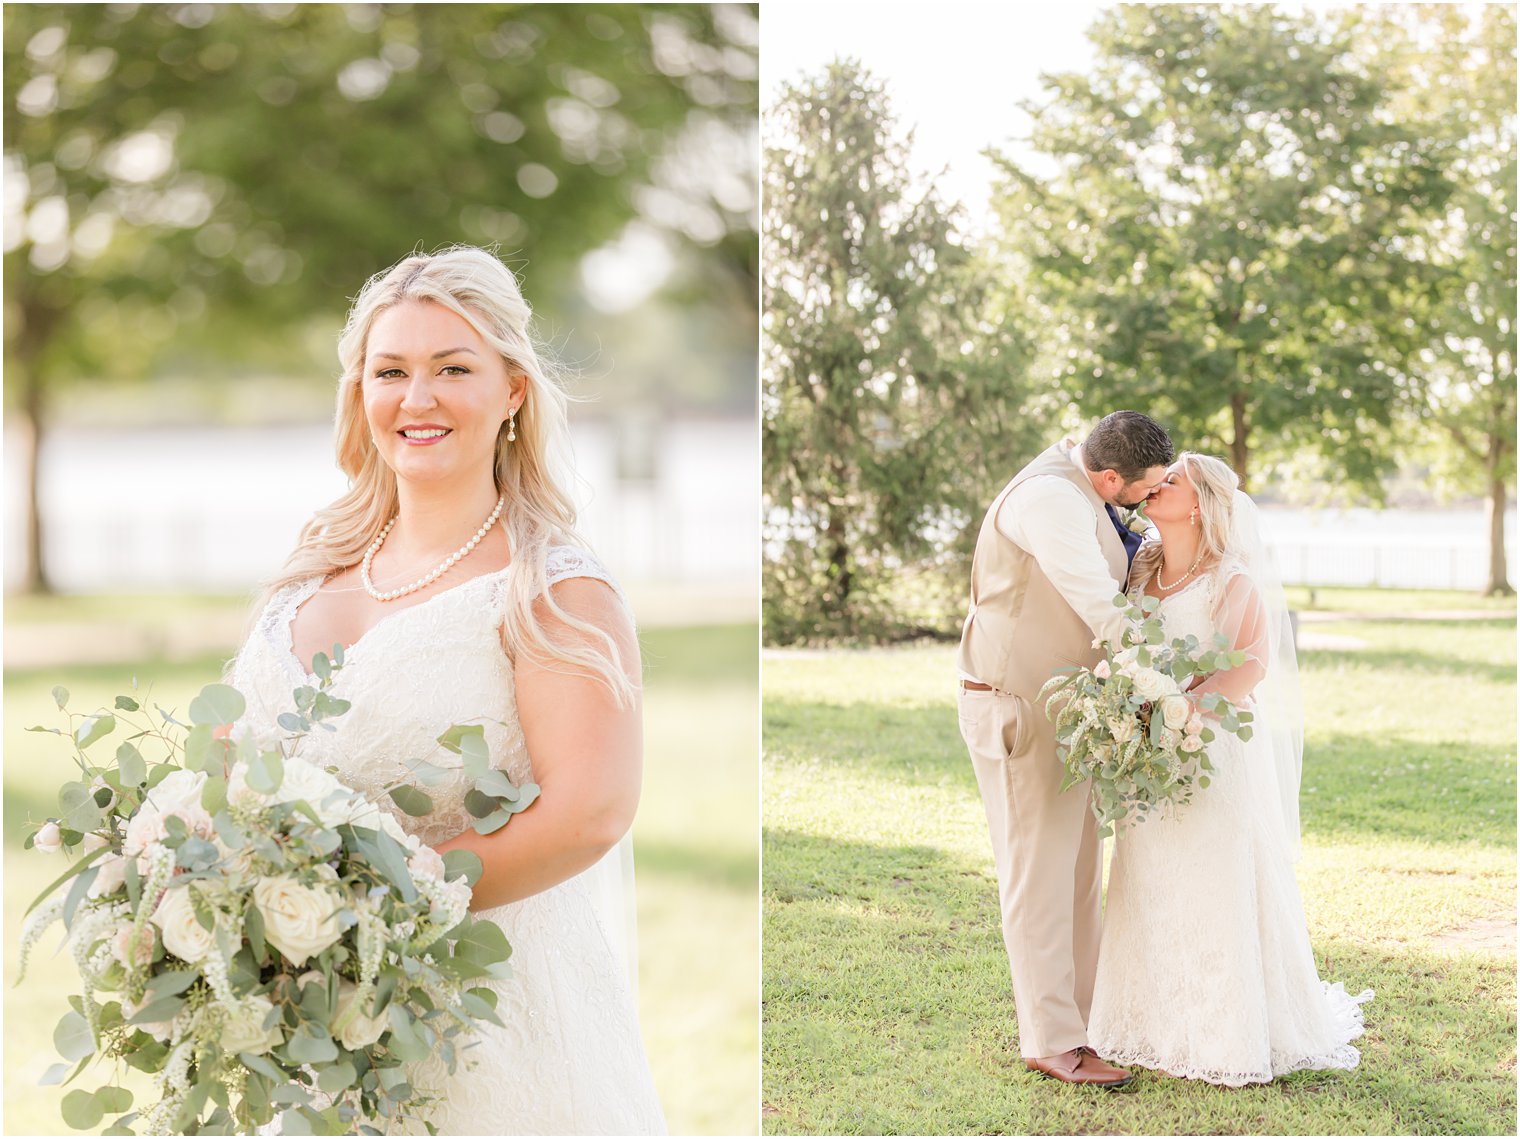 classic bridal portrait of bride holding white flowers and eucalyptus leaves